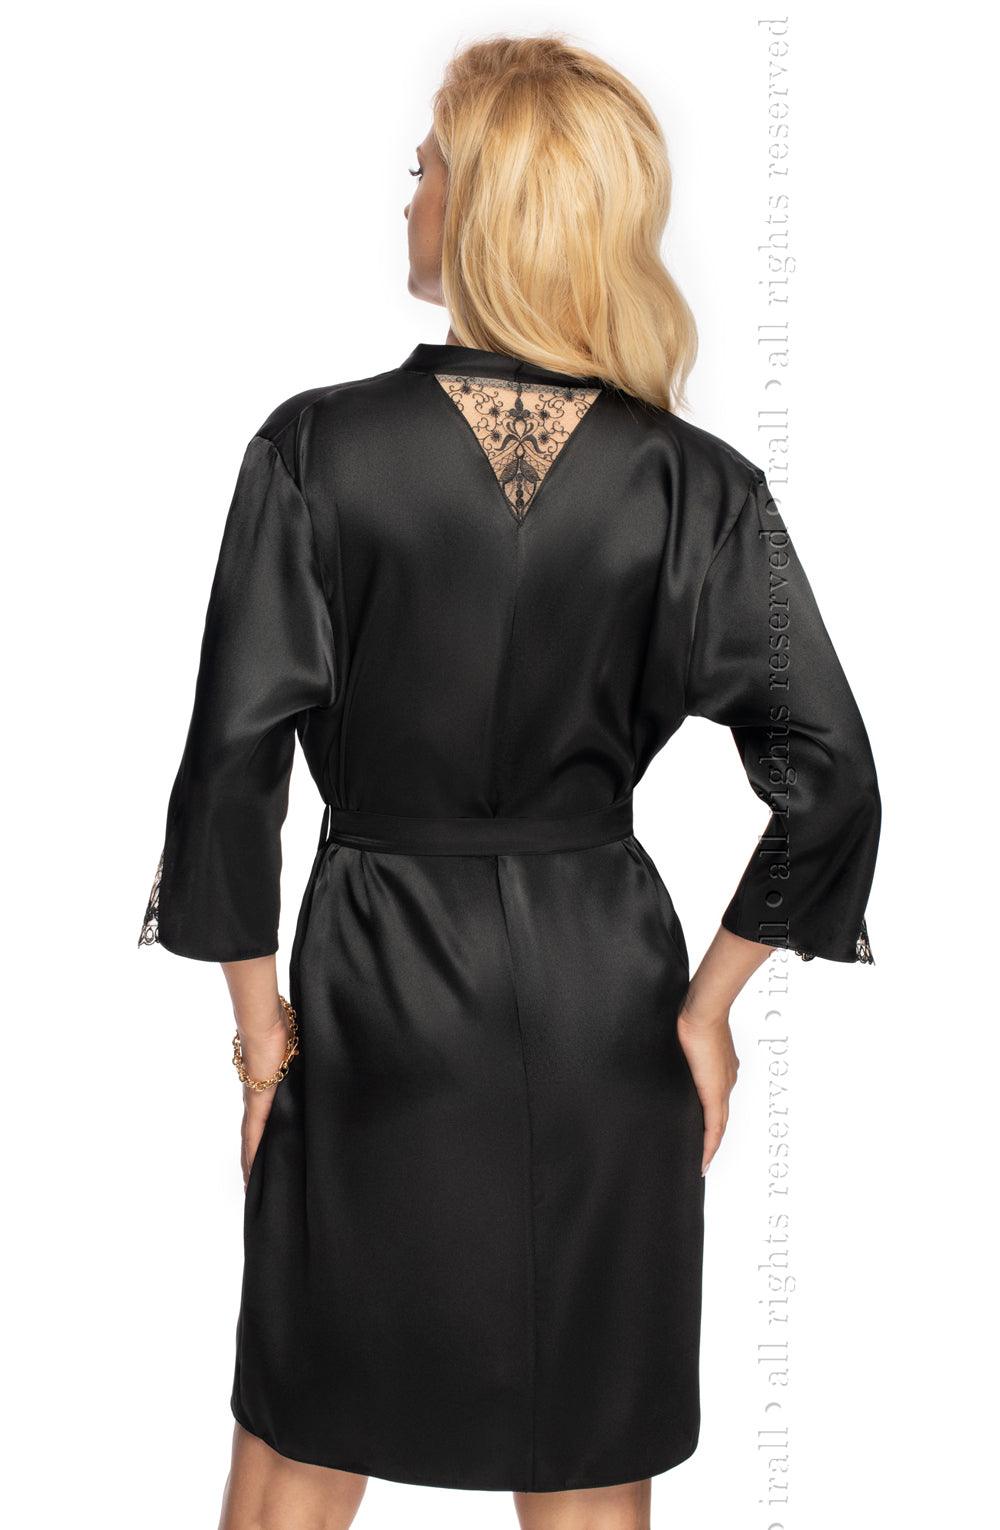 Irall Mallory Dressing Gown Black - Sydney Rose Lingerie 